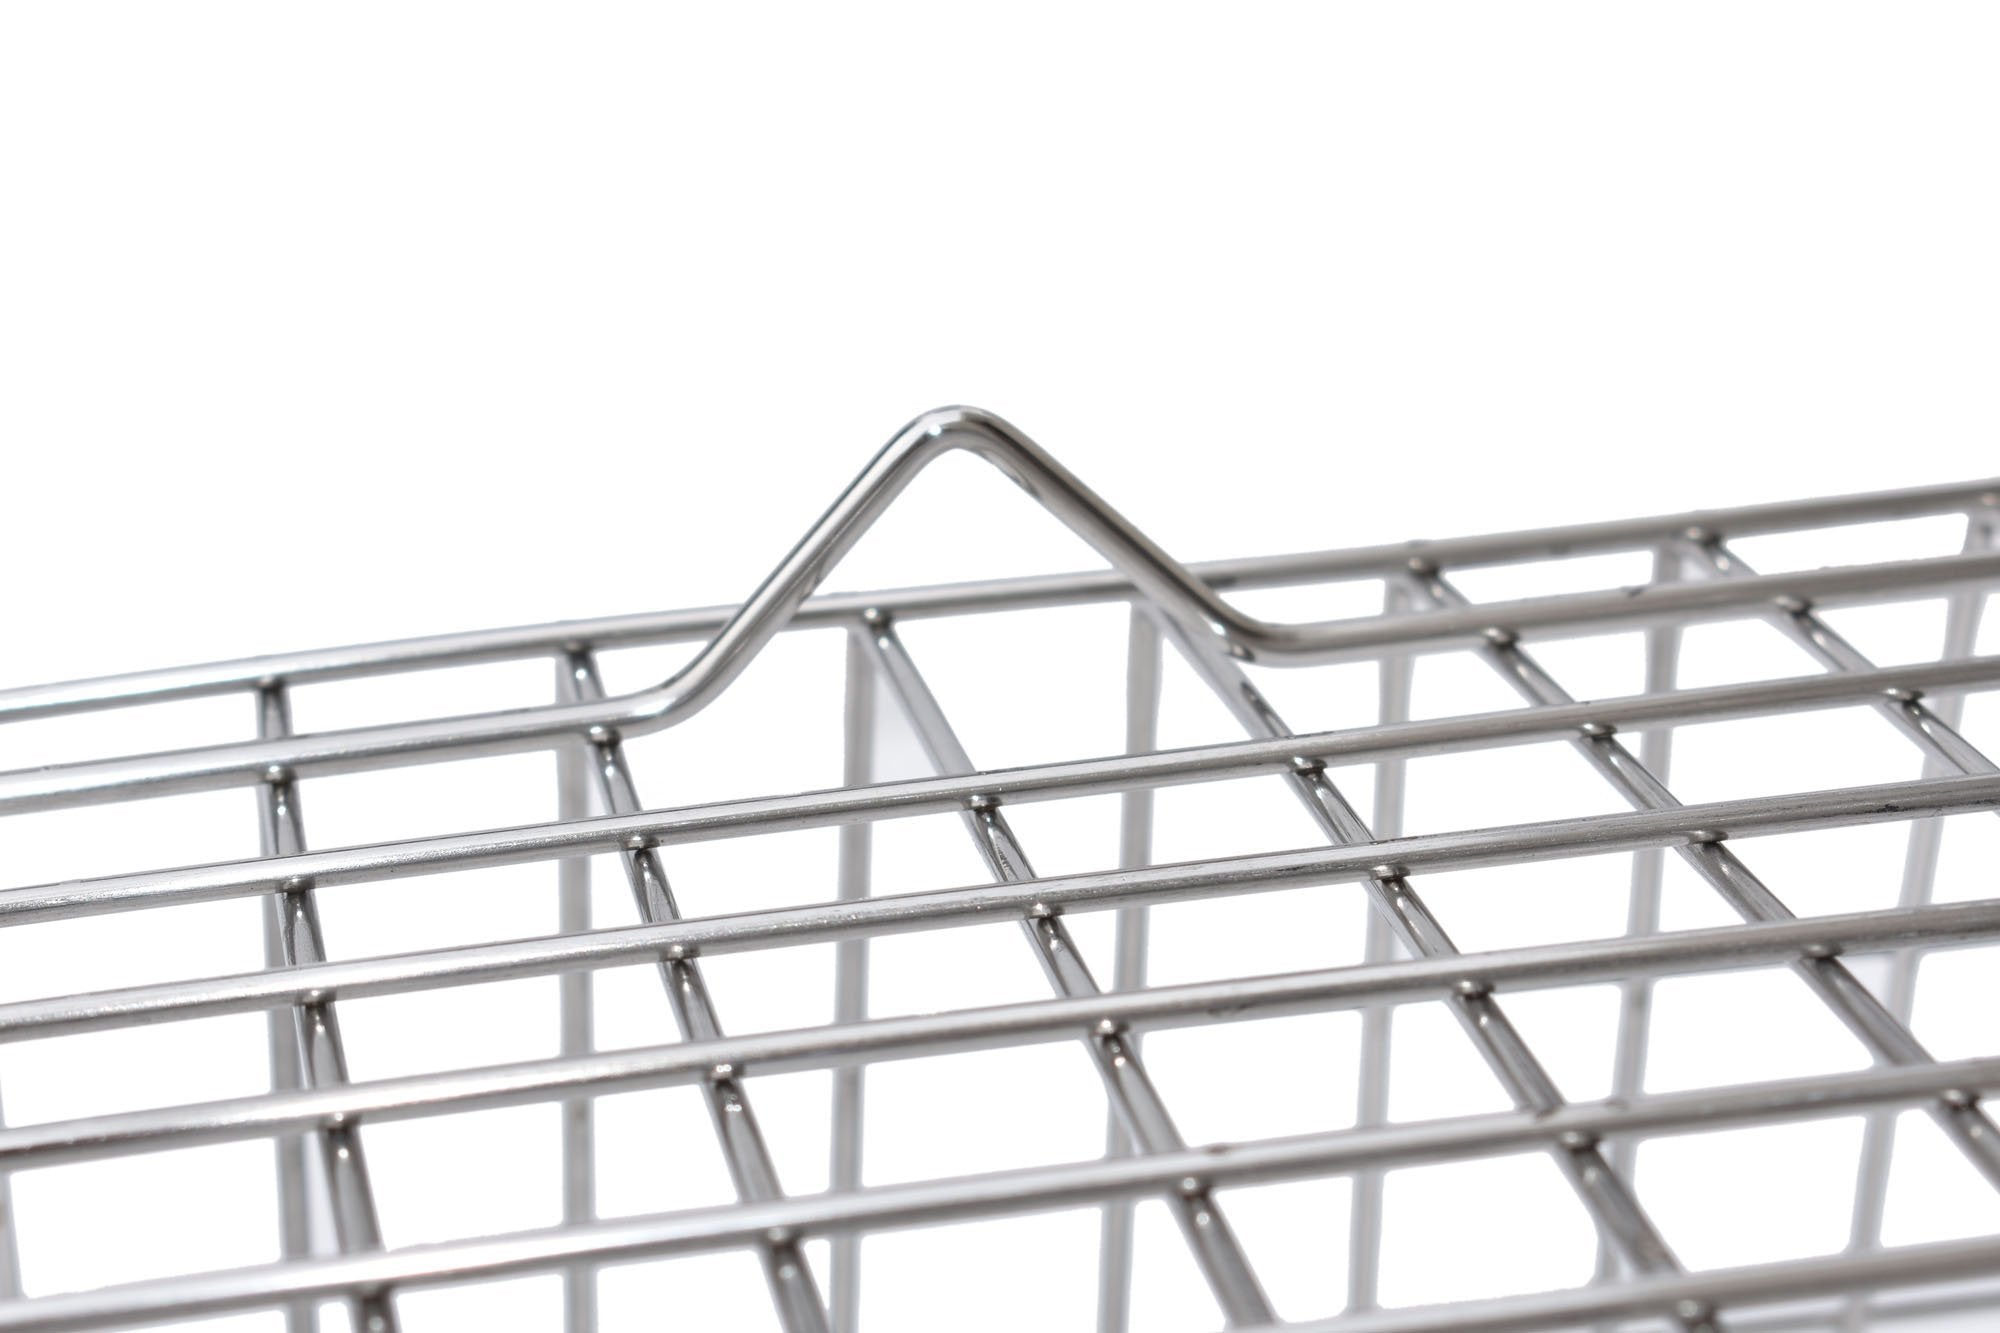 Plantex Heavy-Duty Stainless-Steel Dish Drainer Basket for Kitchen Utensils/Dish Drying Rack/Plate Stand/Bartan Basket (Size-58x45x20cm)